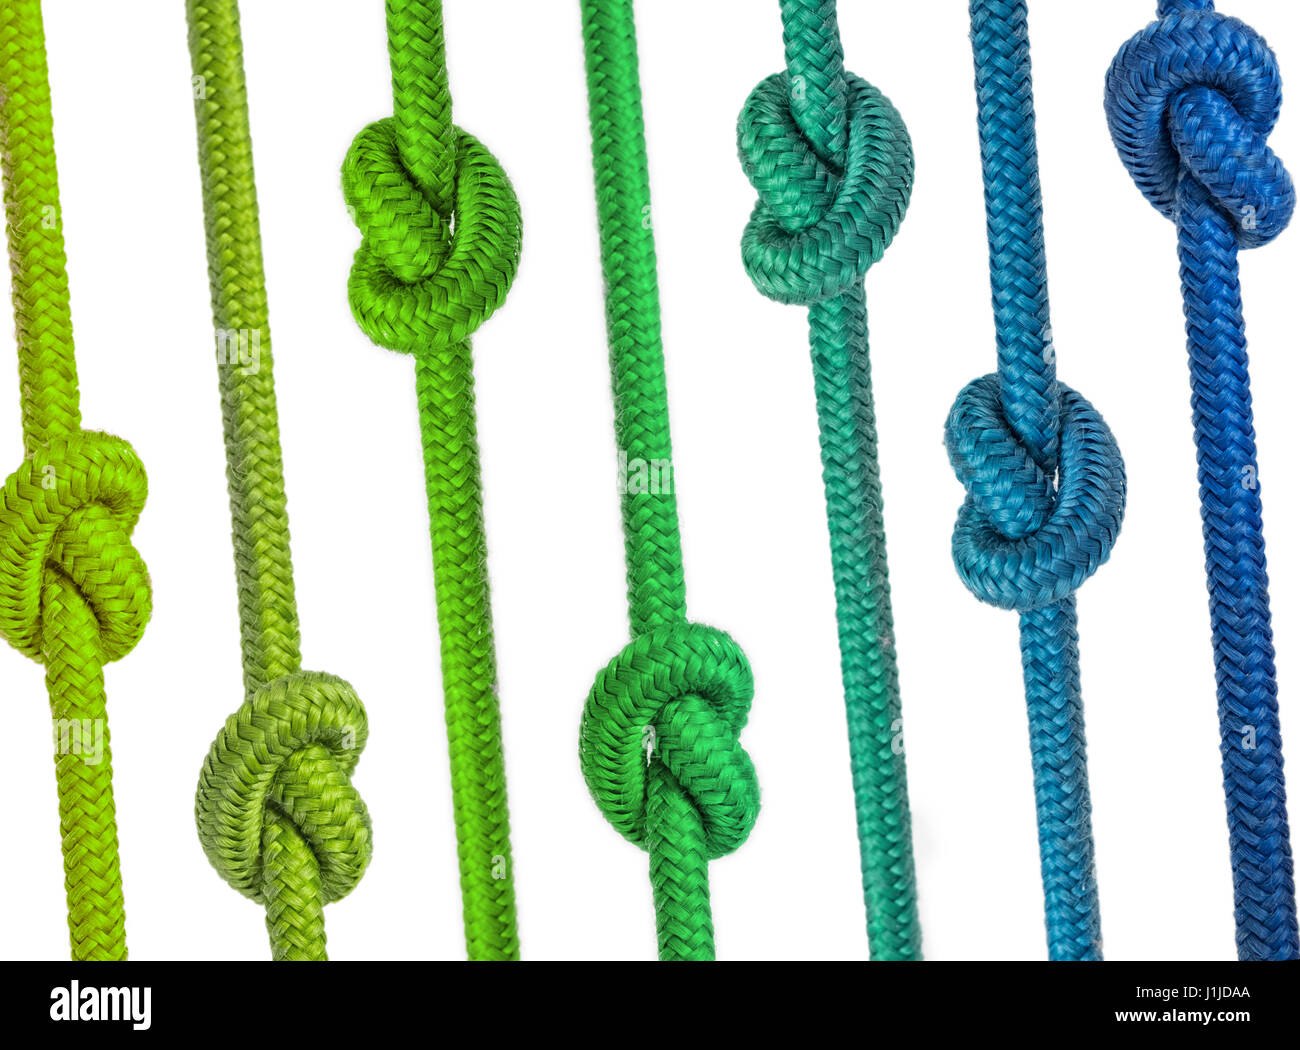 colorful group of ropes with knots in a row Stock Photo